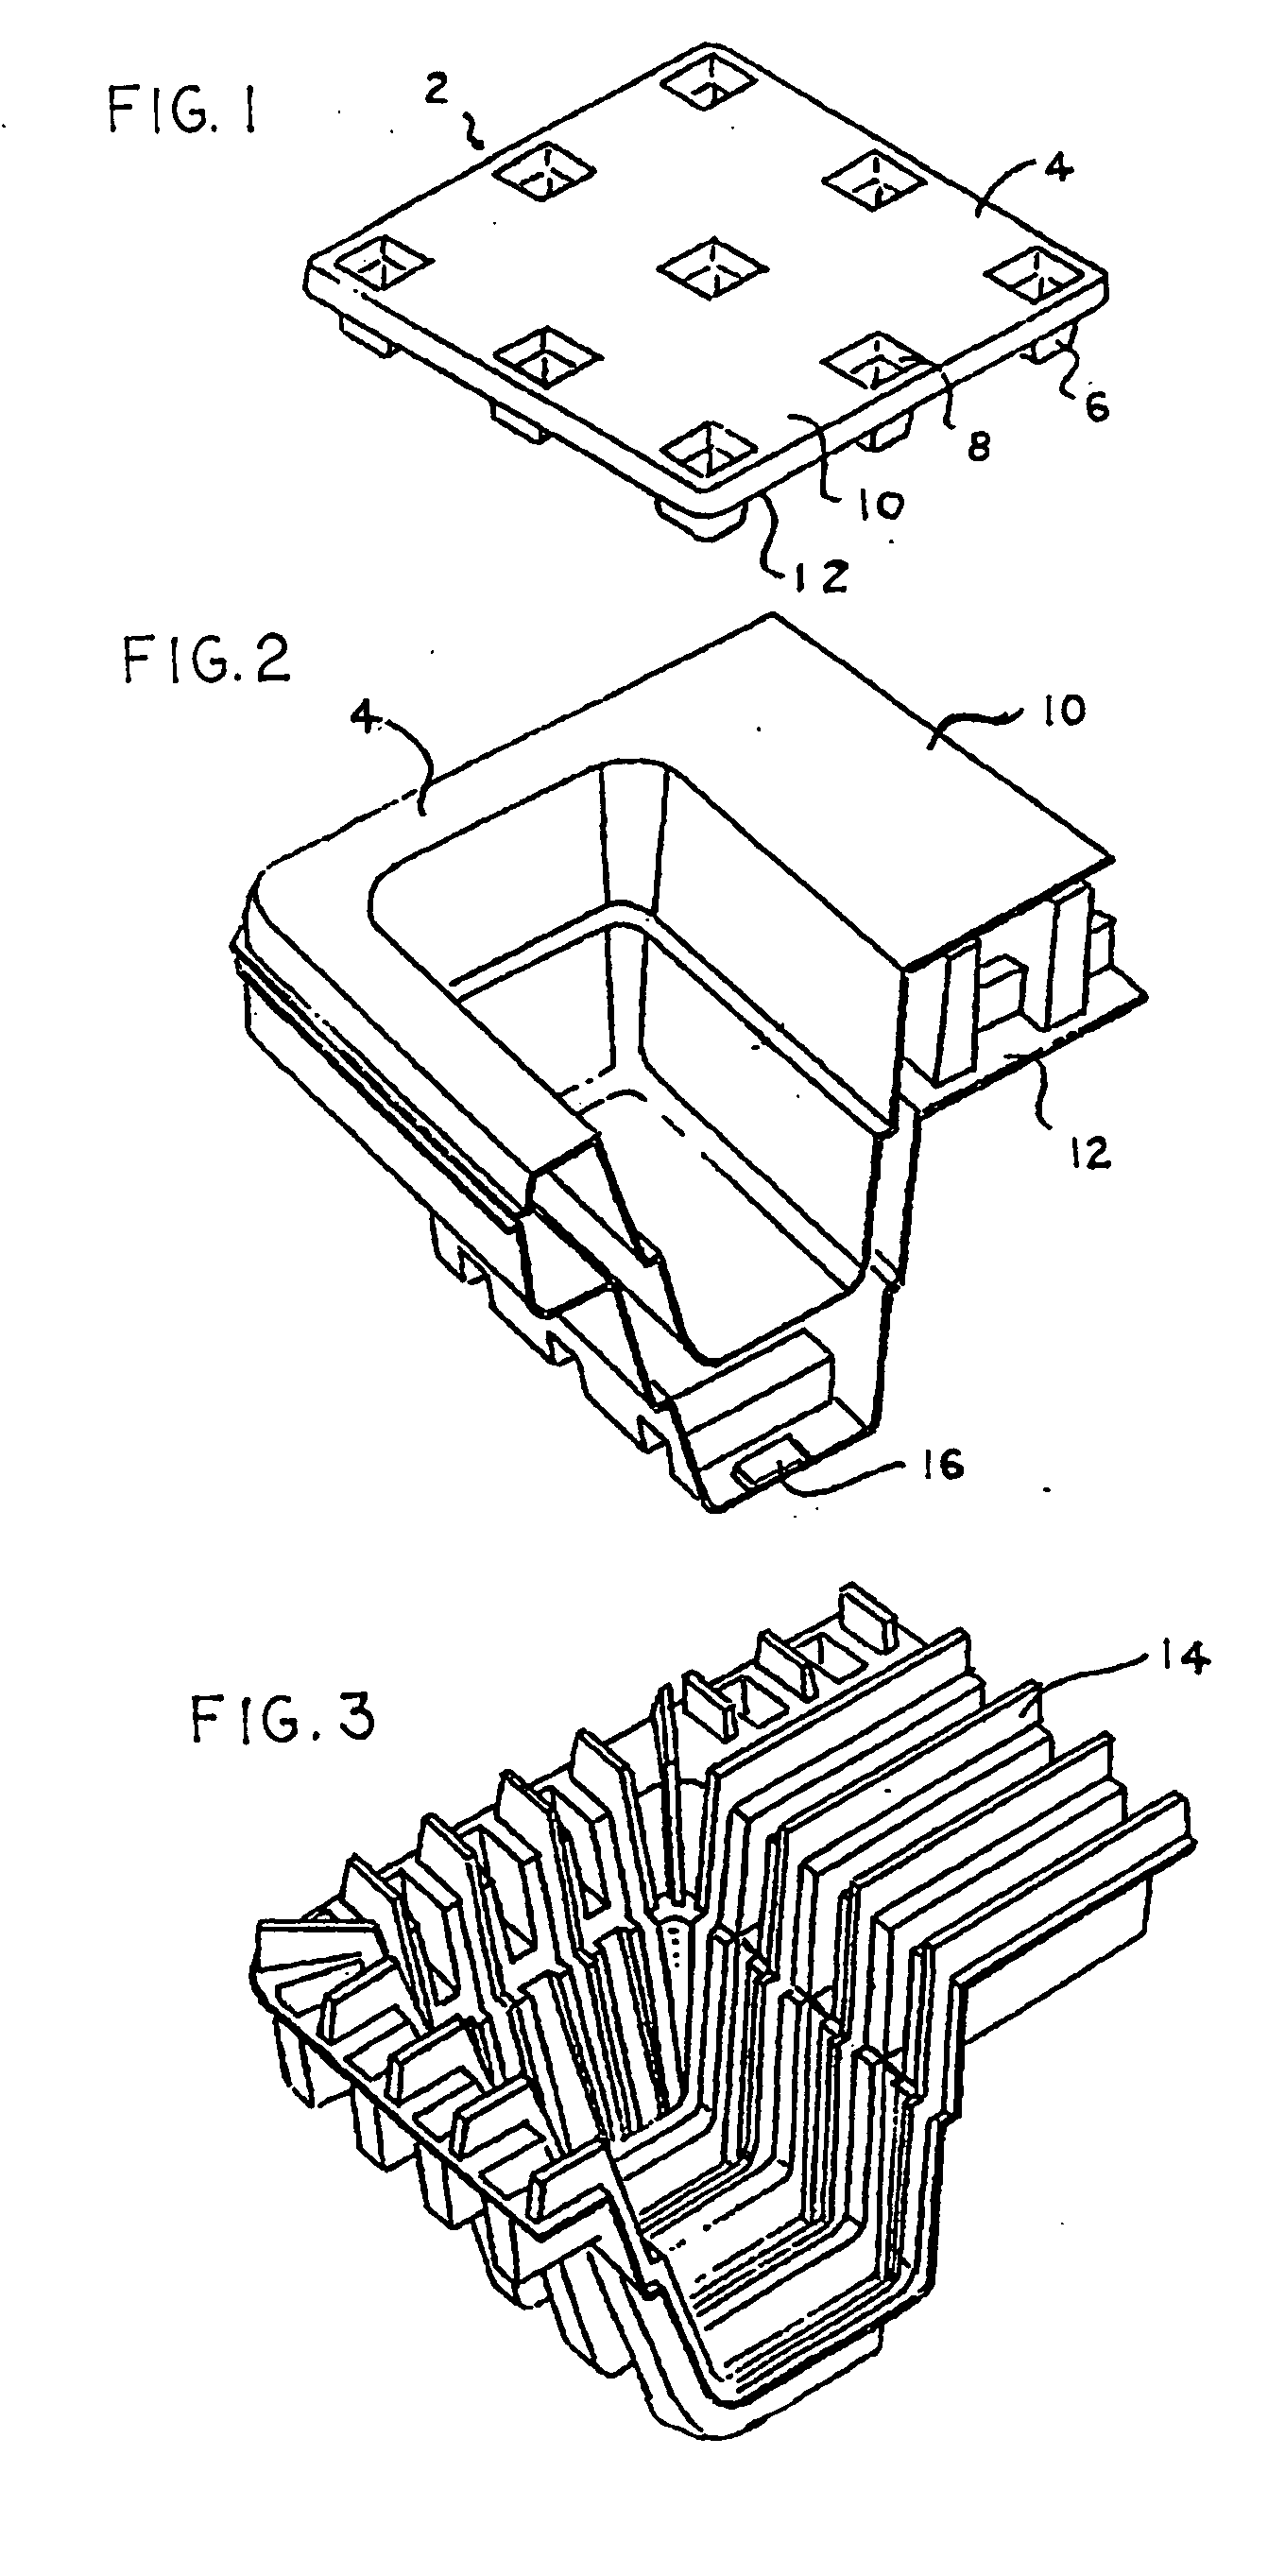 Thermoformed platform having a communications device